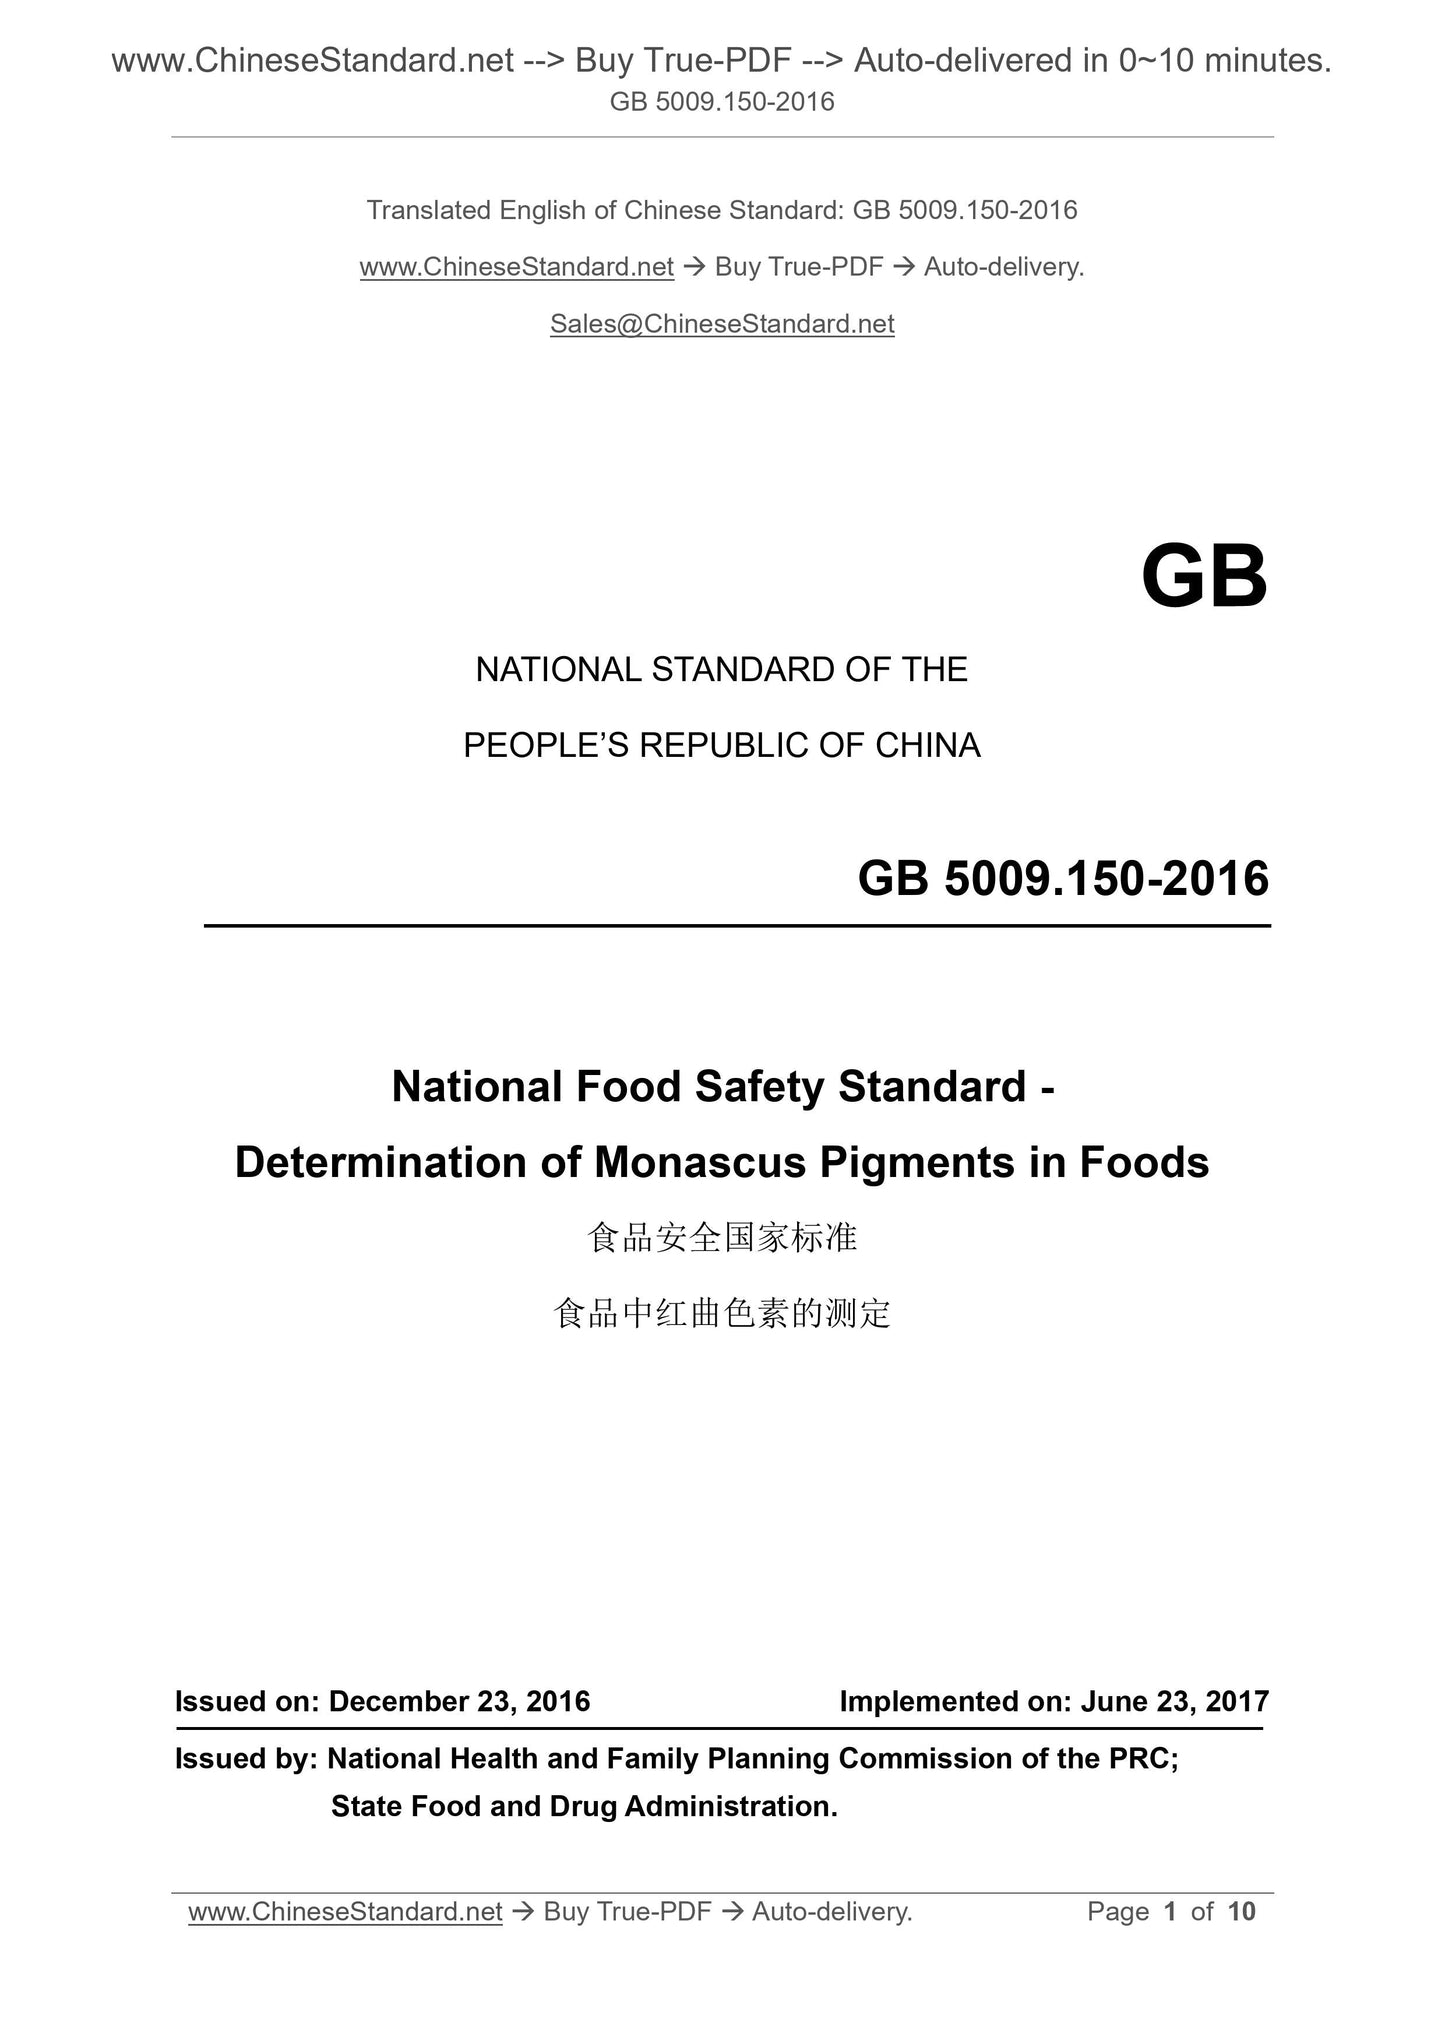 GB 5009.150-2016 Page 1